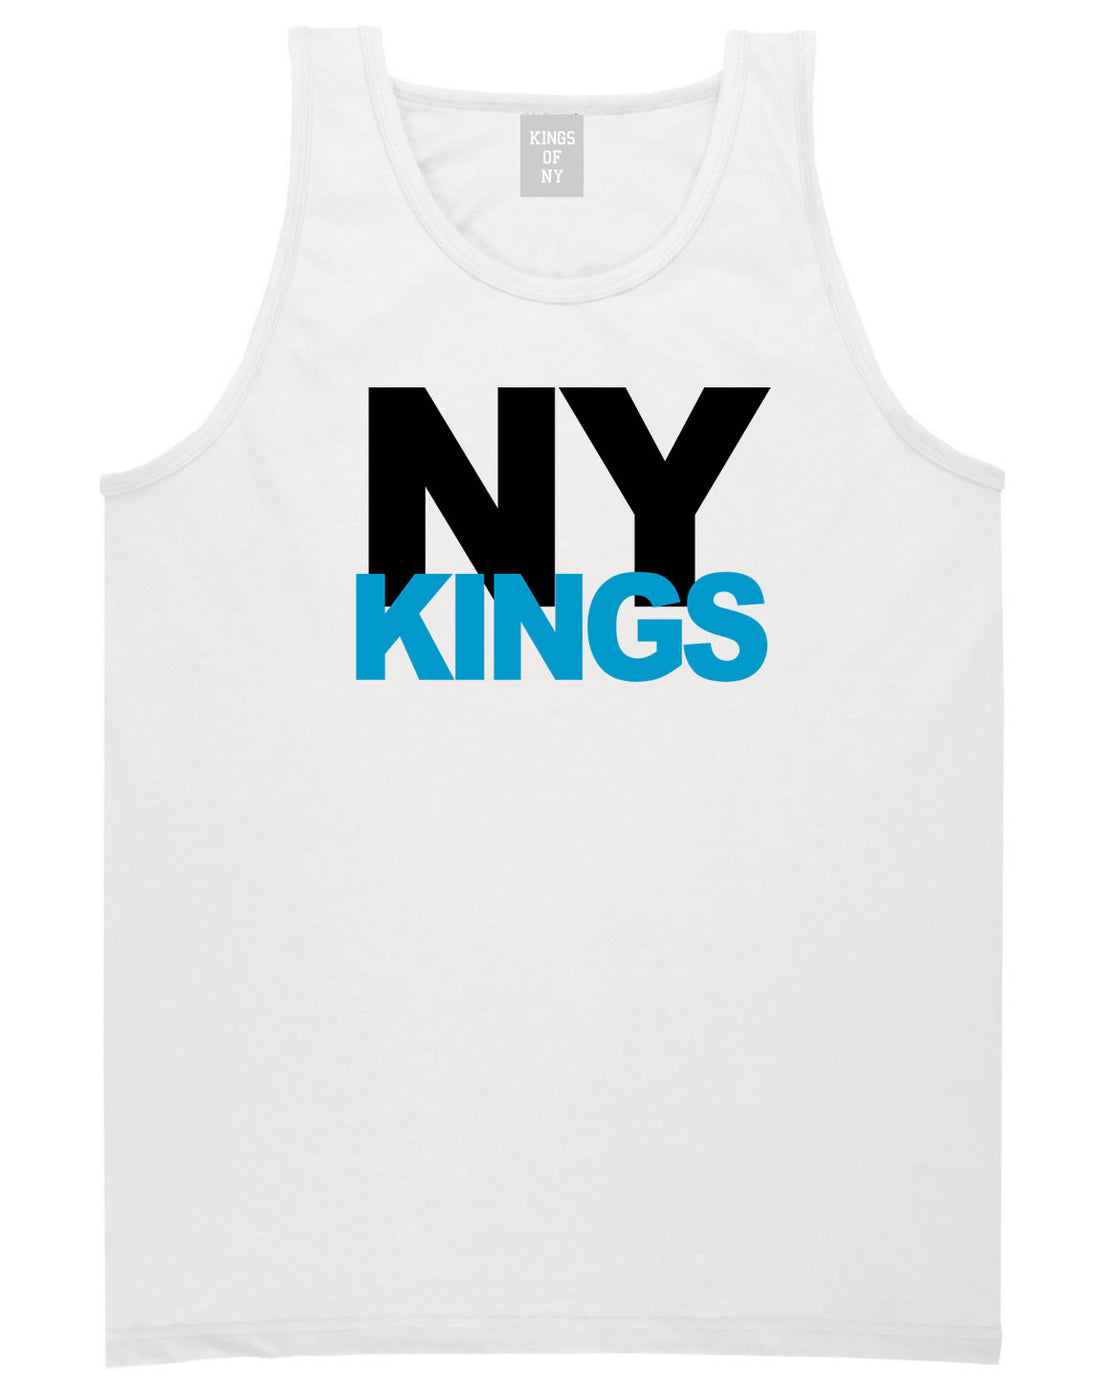 NY Kings Knows Tank Top in White By Kings Of NY